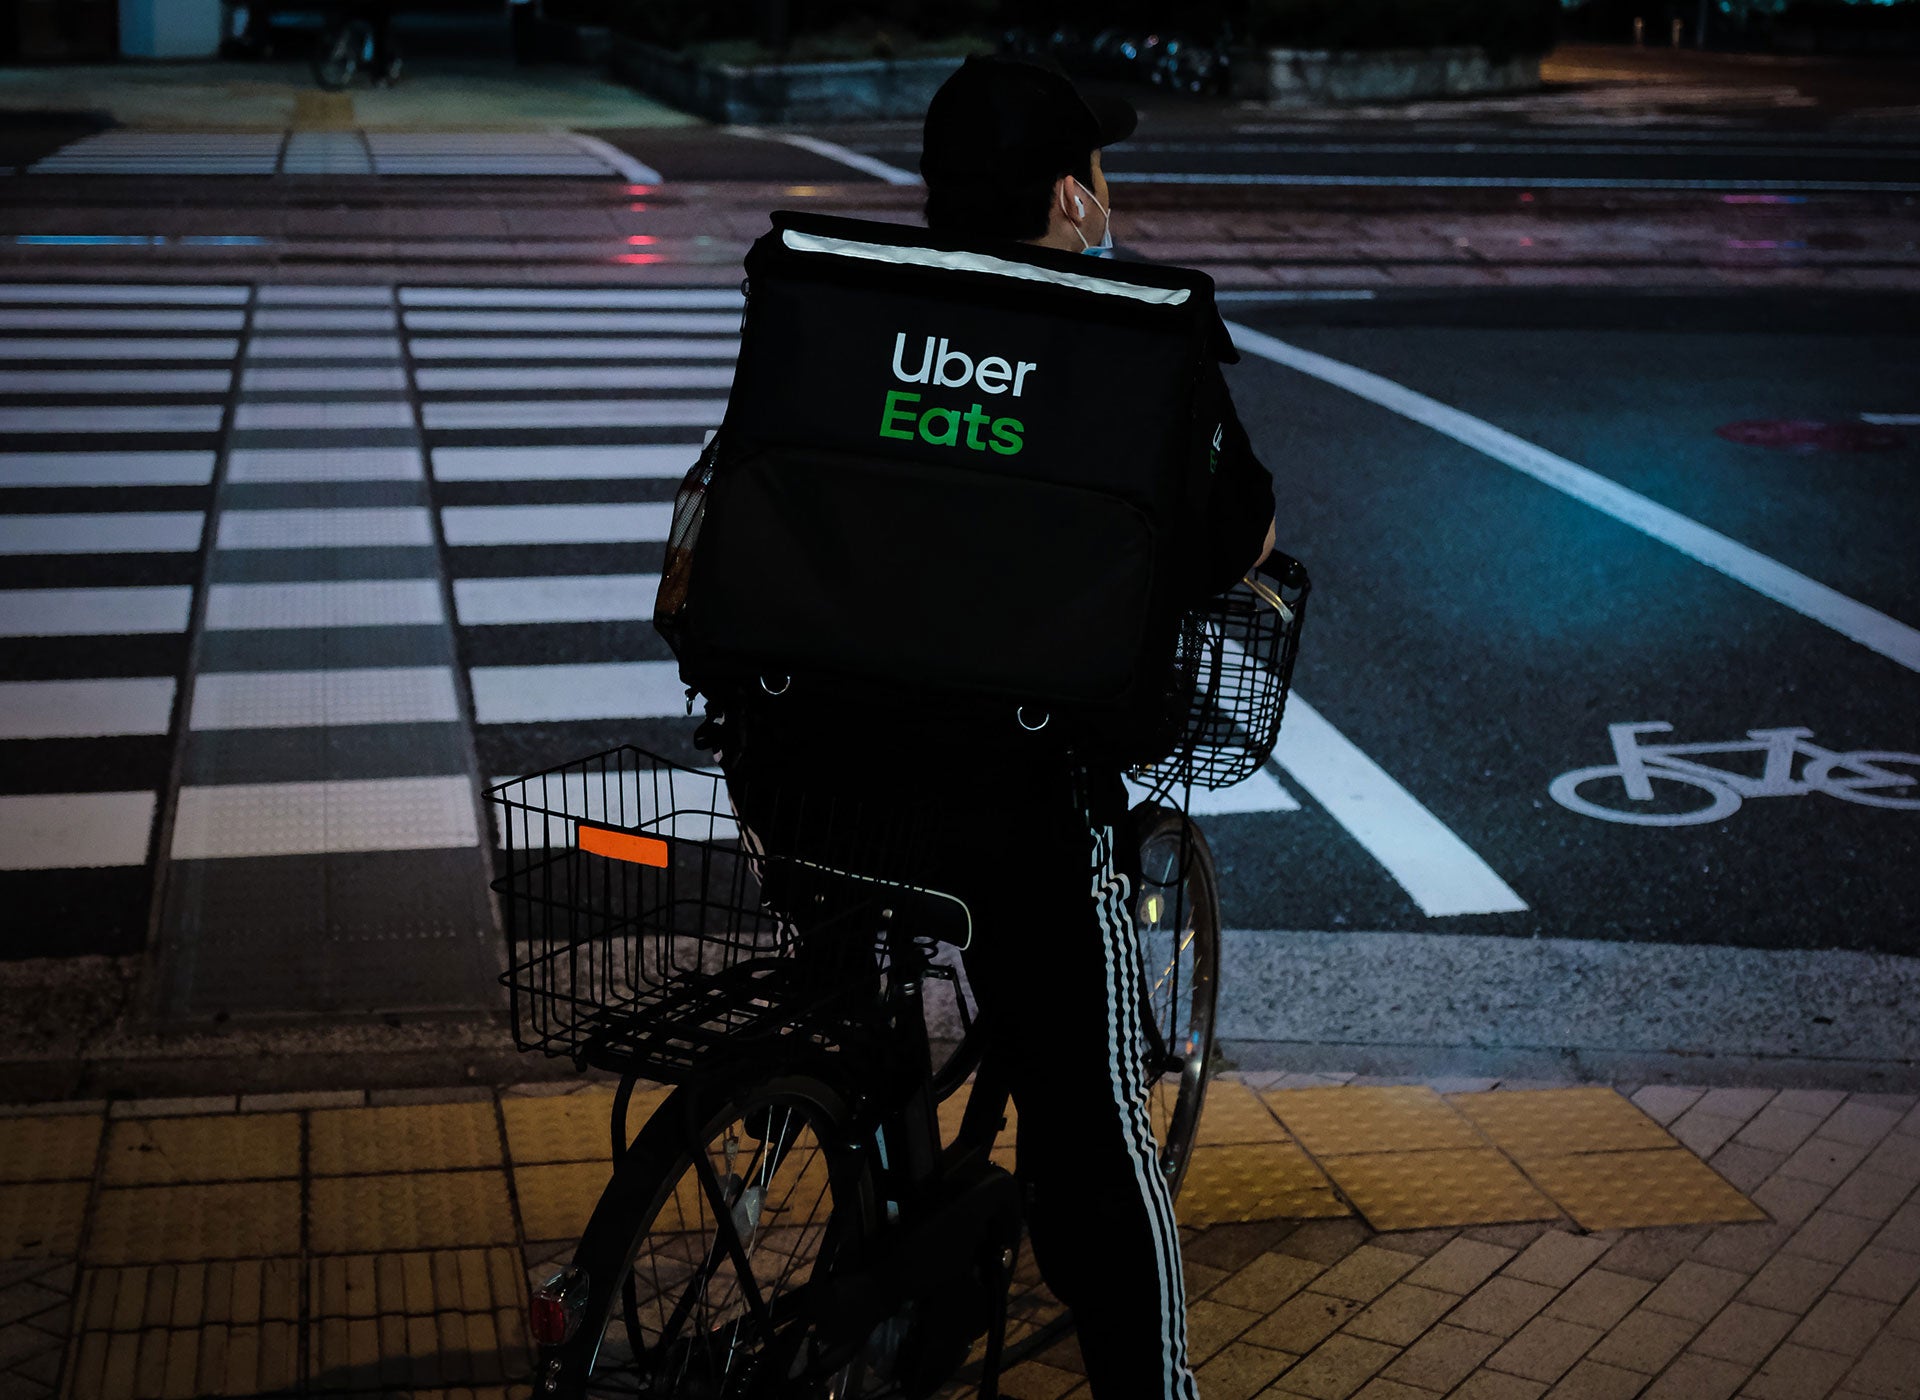 Sales of food delivery accounts surge on dark web marketplaces